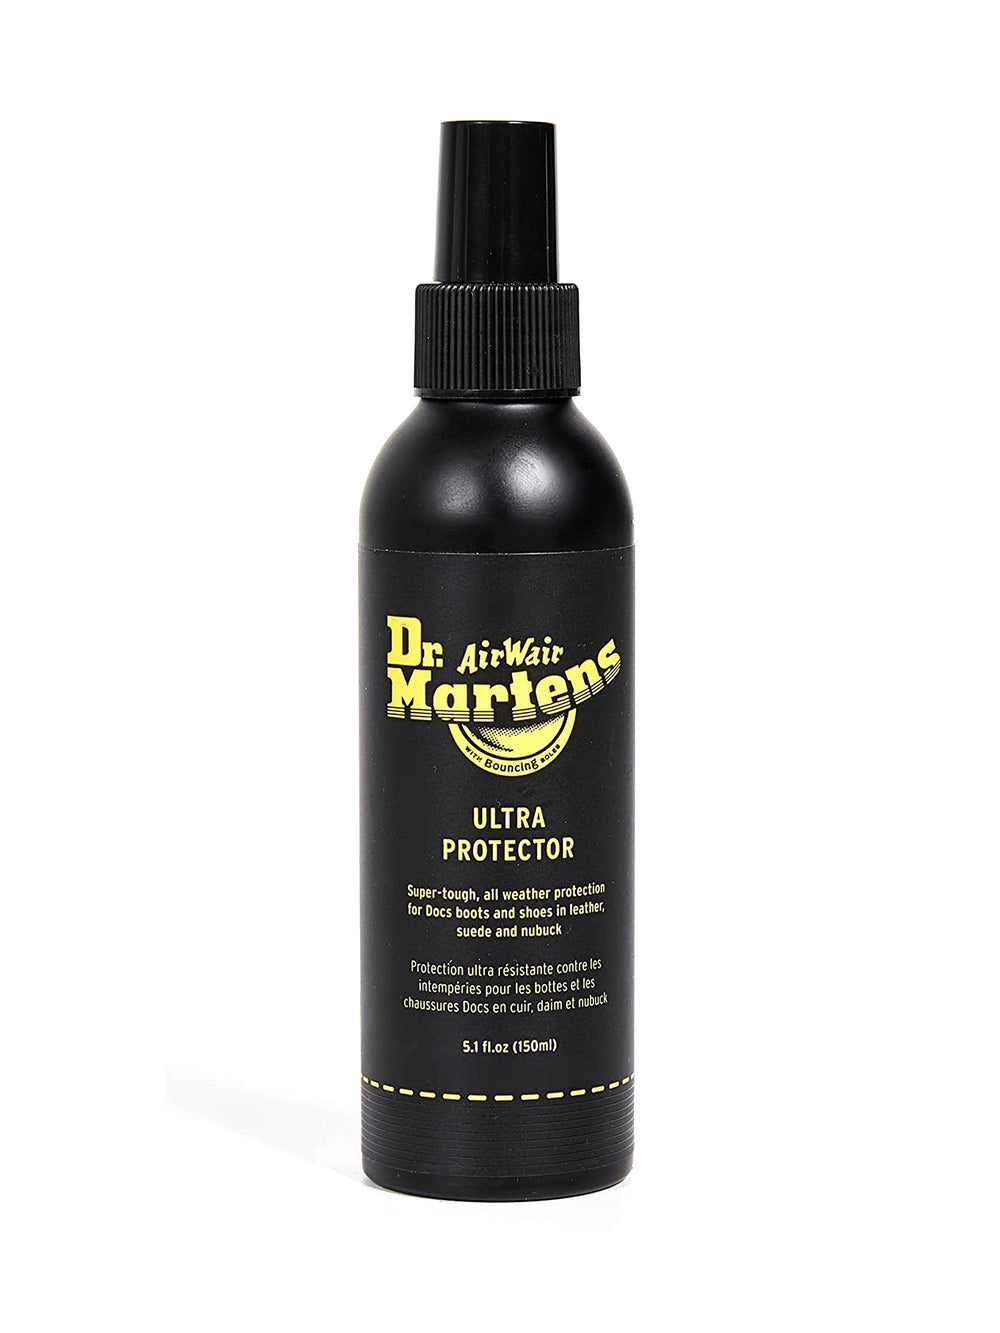 DR MARTENS ULTRA PROTECTOR 150ML